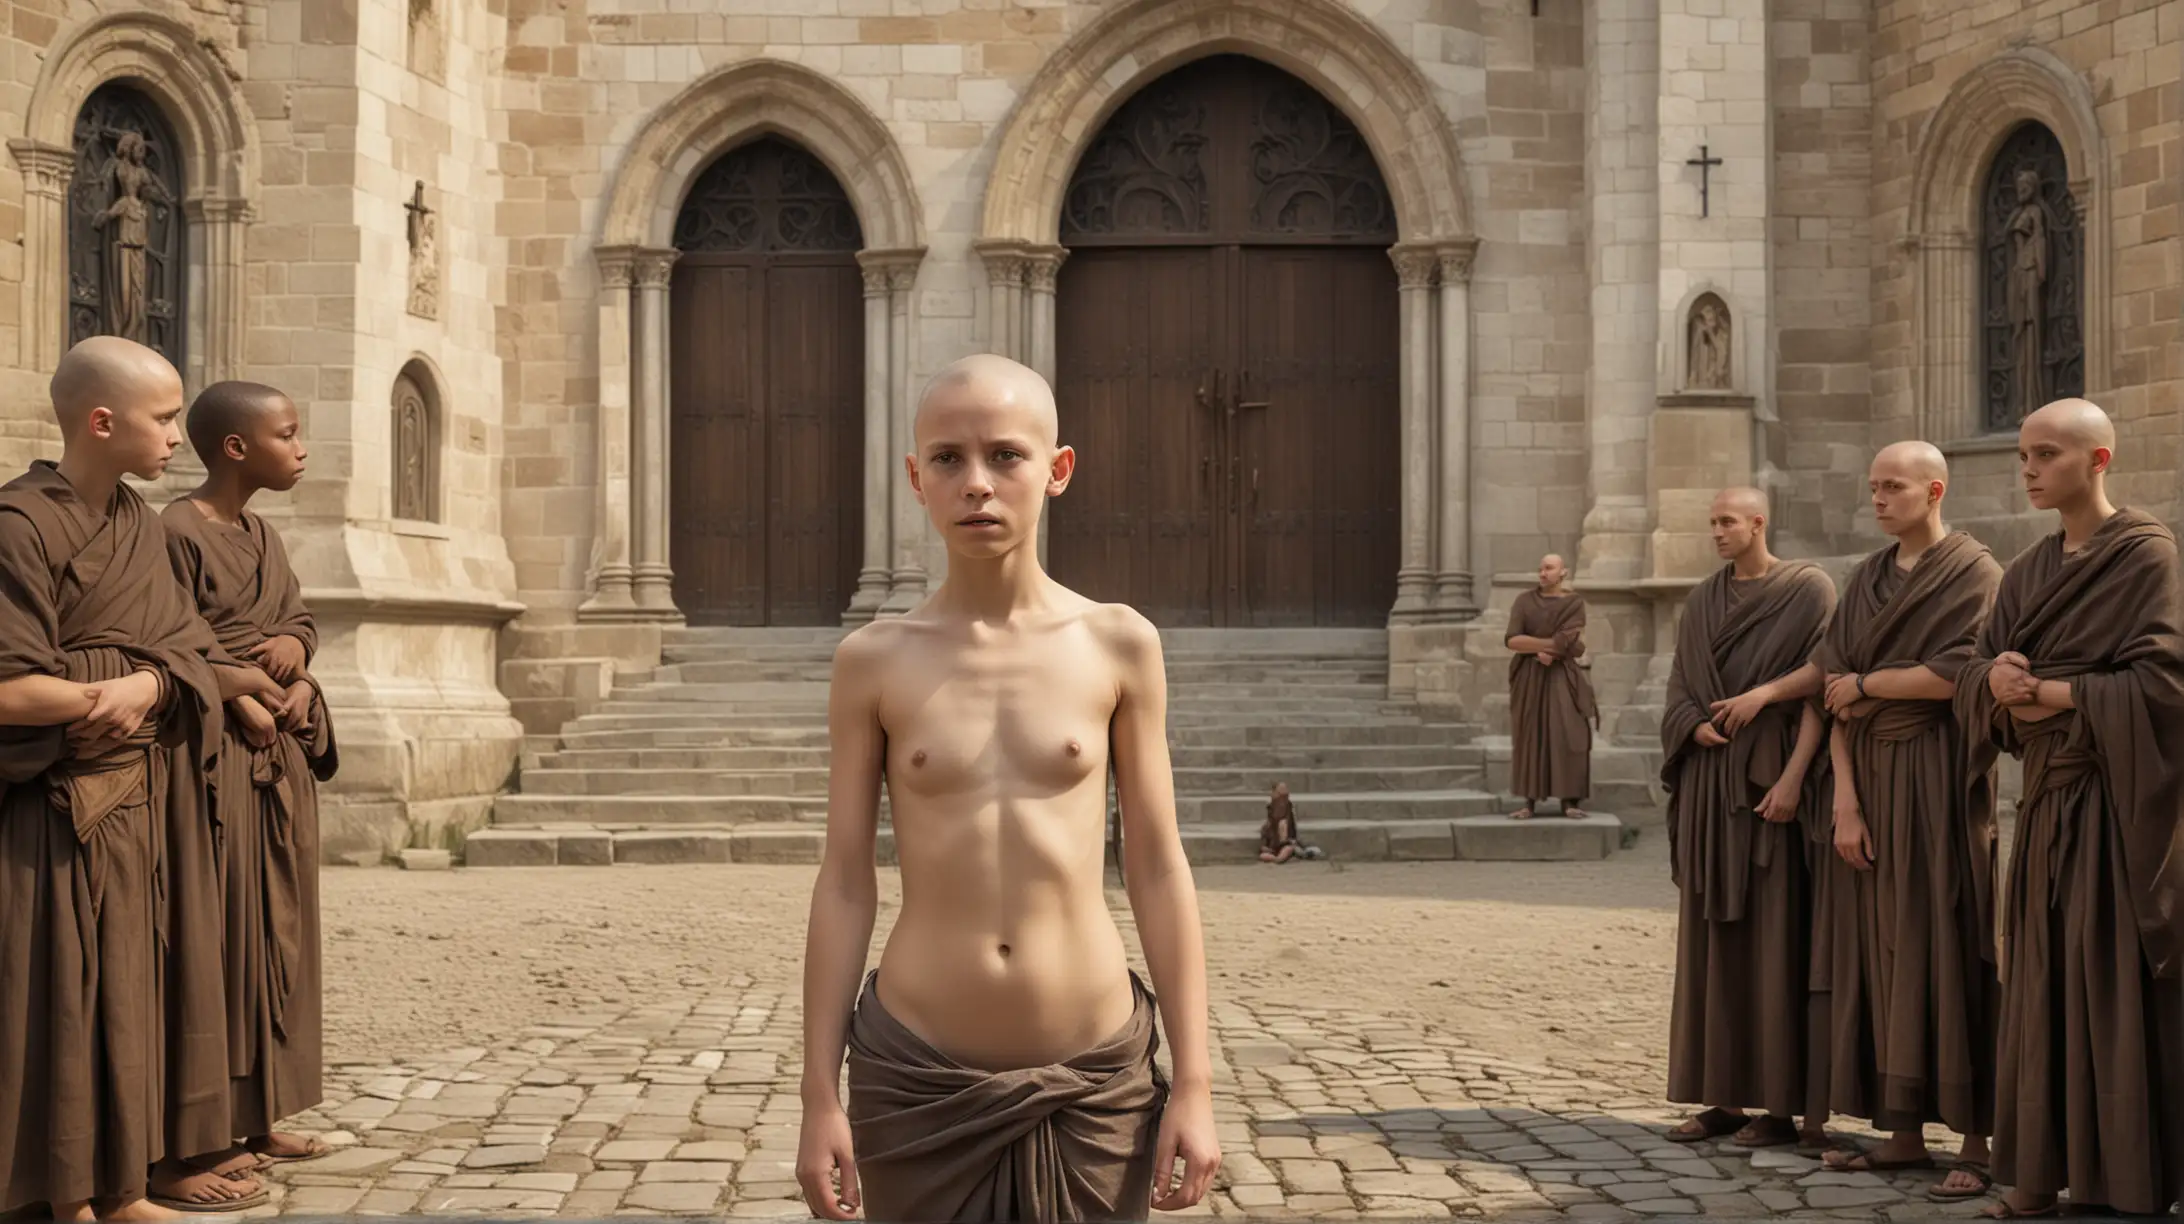 hyperrealistic image of a 1st century historical scene: a bald skinny topless 10 year old girl standing full frontal full body view in front of a church is surrounded by a group of only 3 christian monks pointing towards the girl